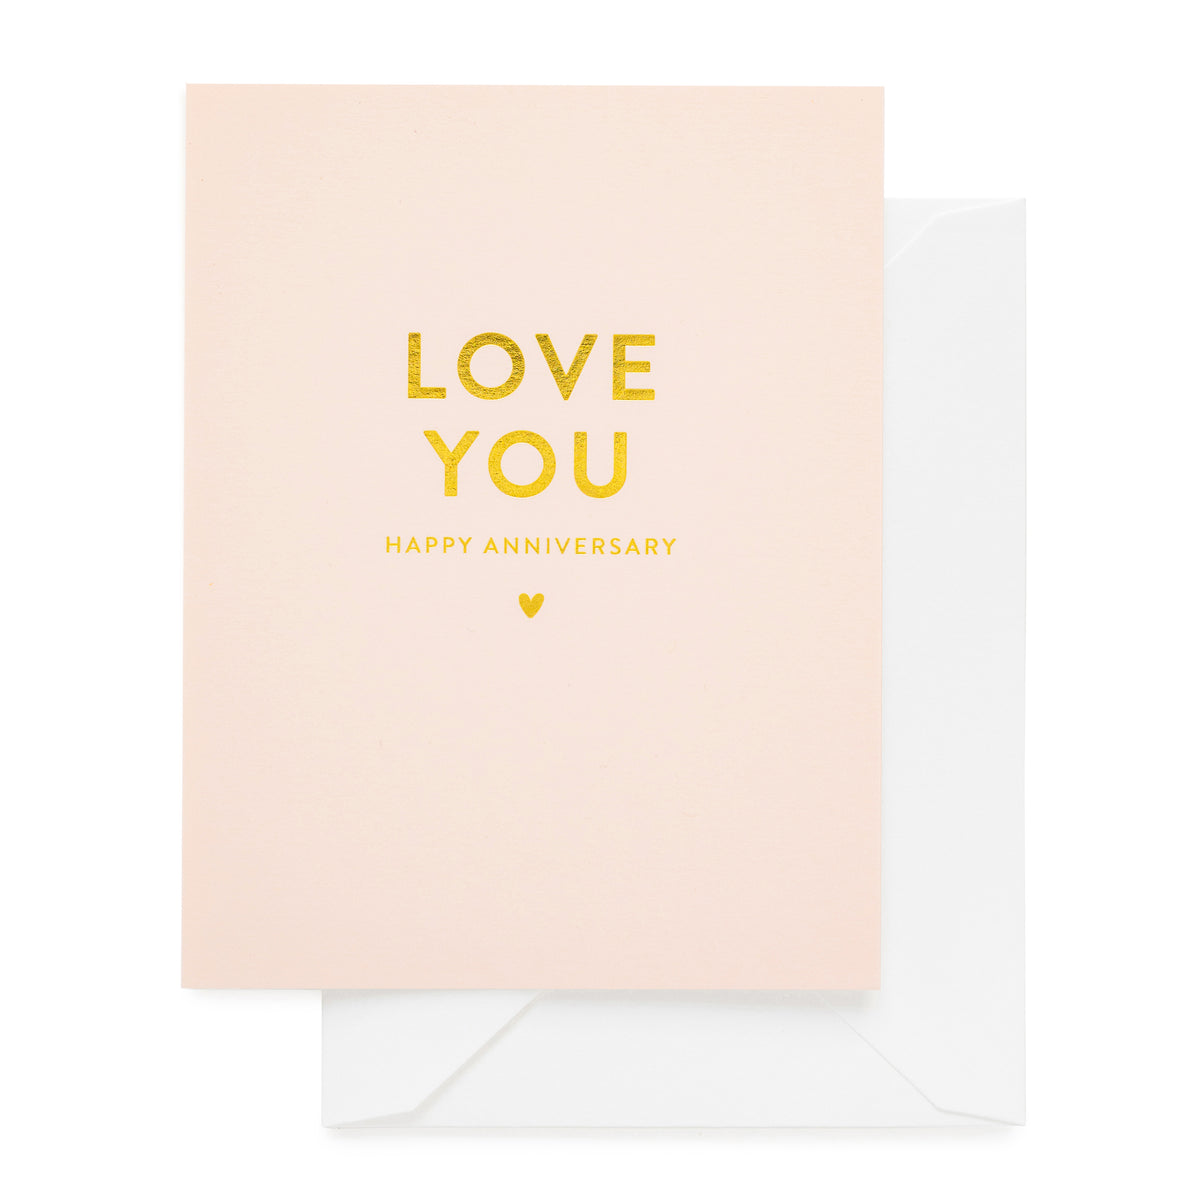 pale pink card with gold text, white envelope